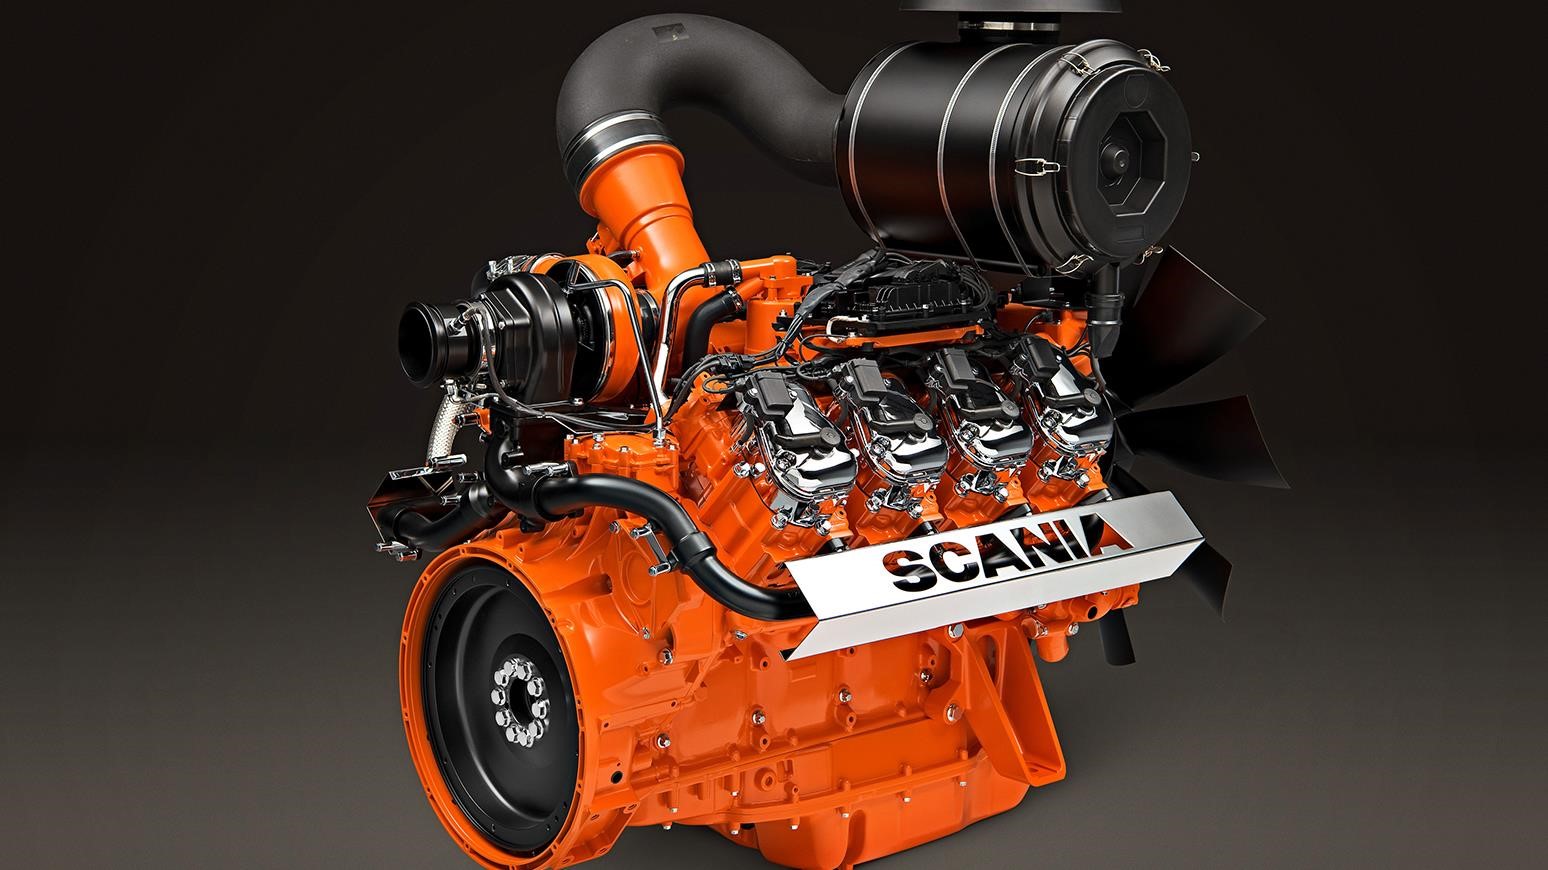 Scania Introduces 16-Litre V8 Engine Powered By Waste